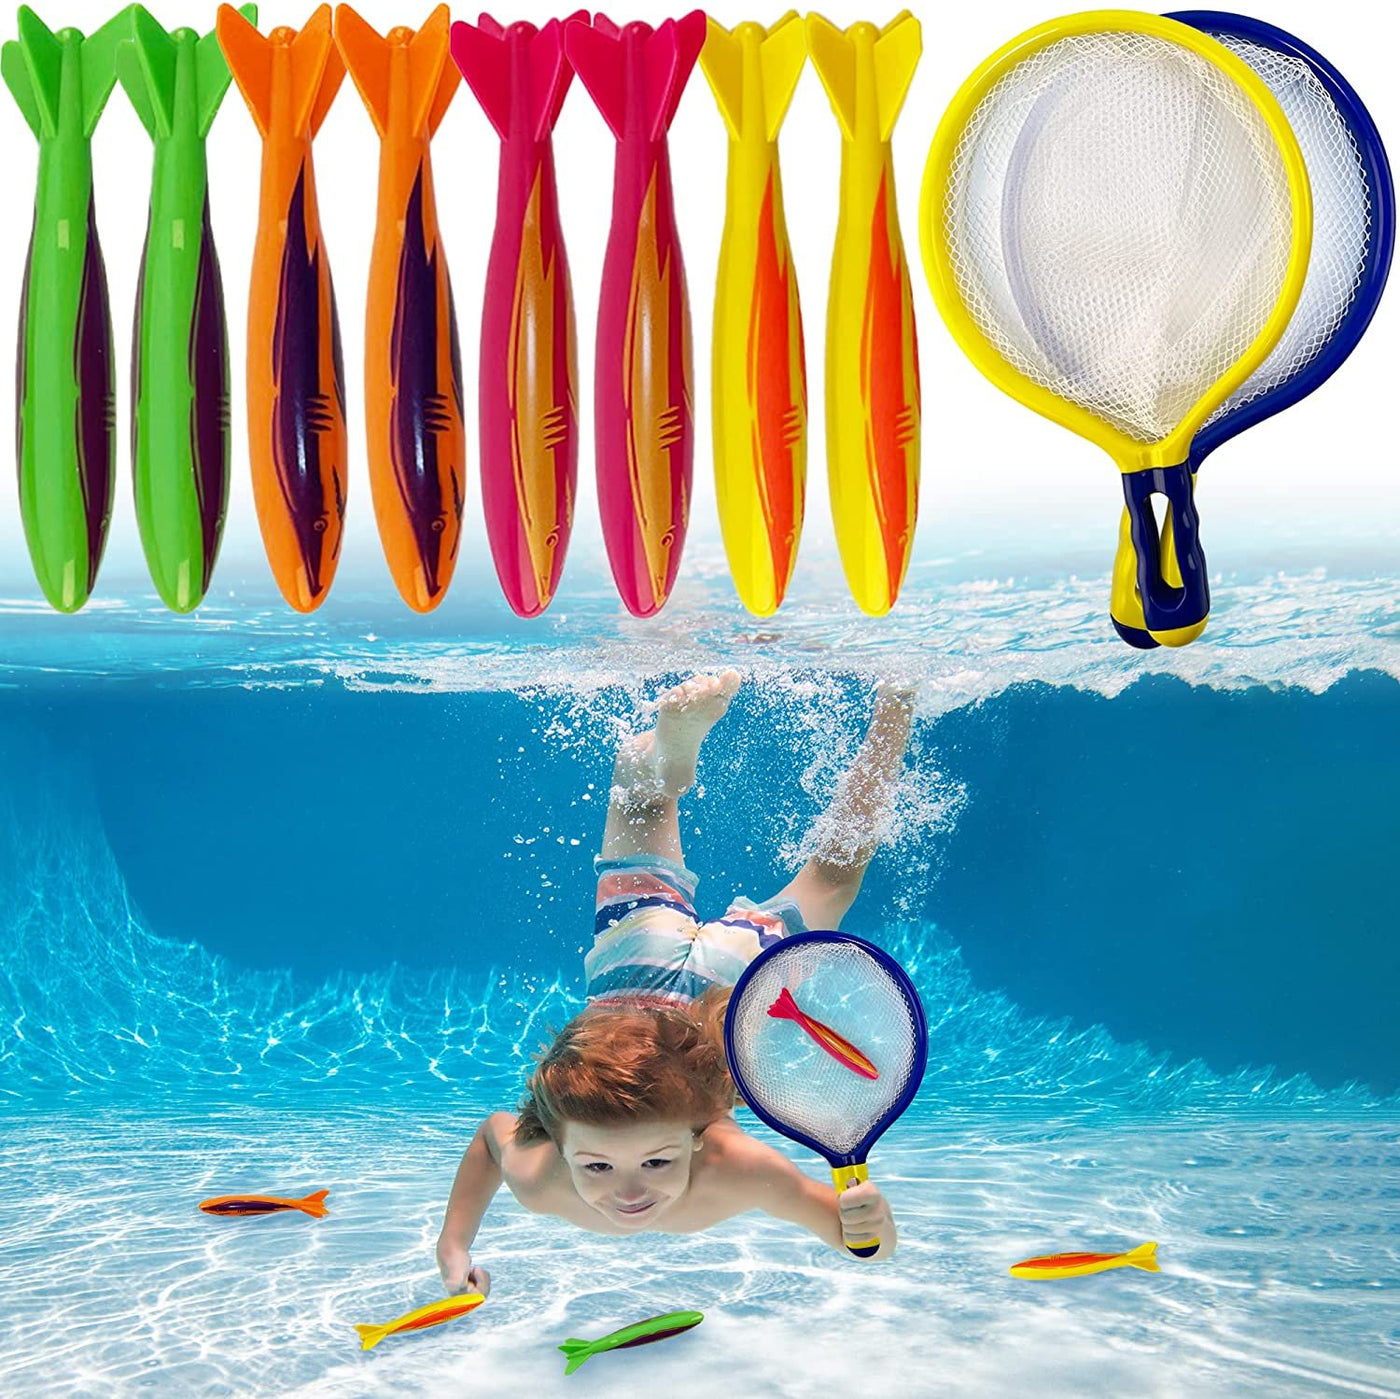 Pool Diving Game for Kids, Underwater Fishing Set with 8 Torpedo Bandits Gliding